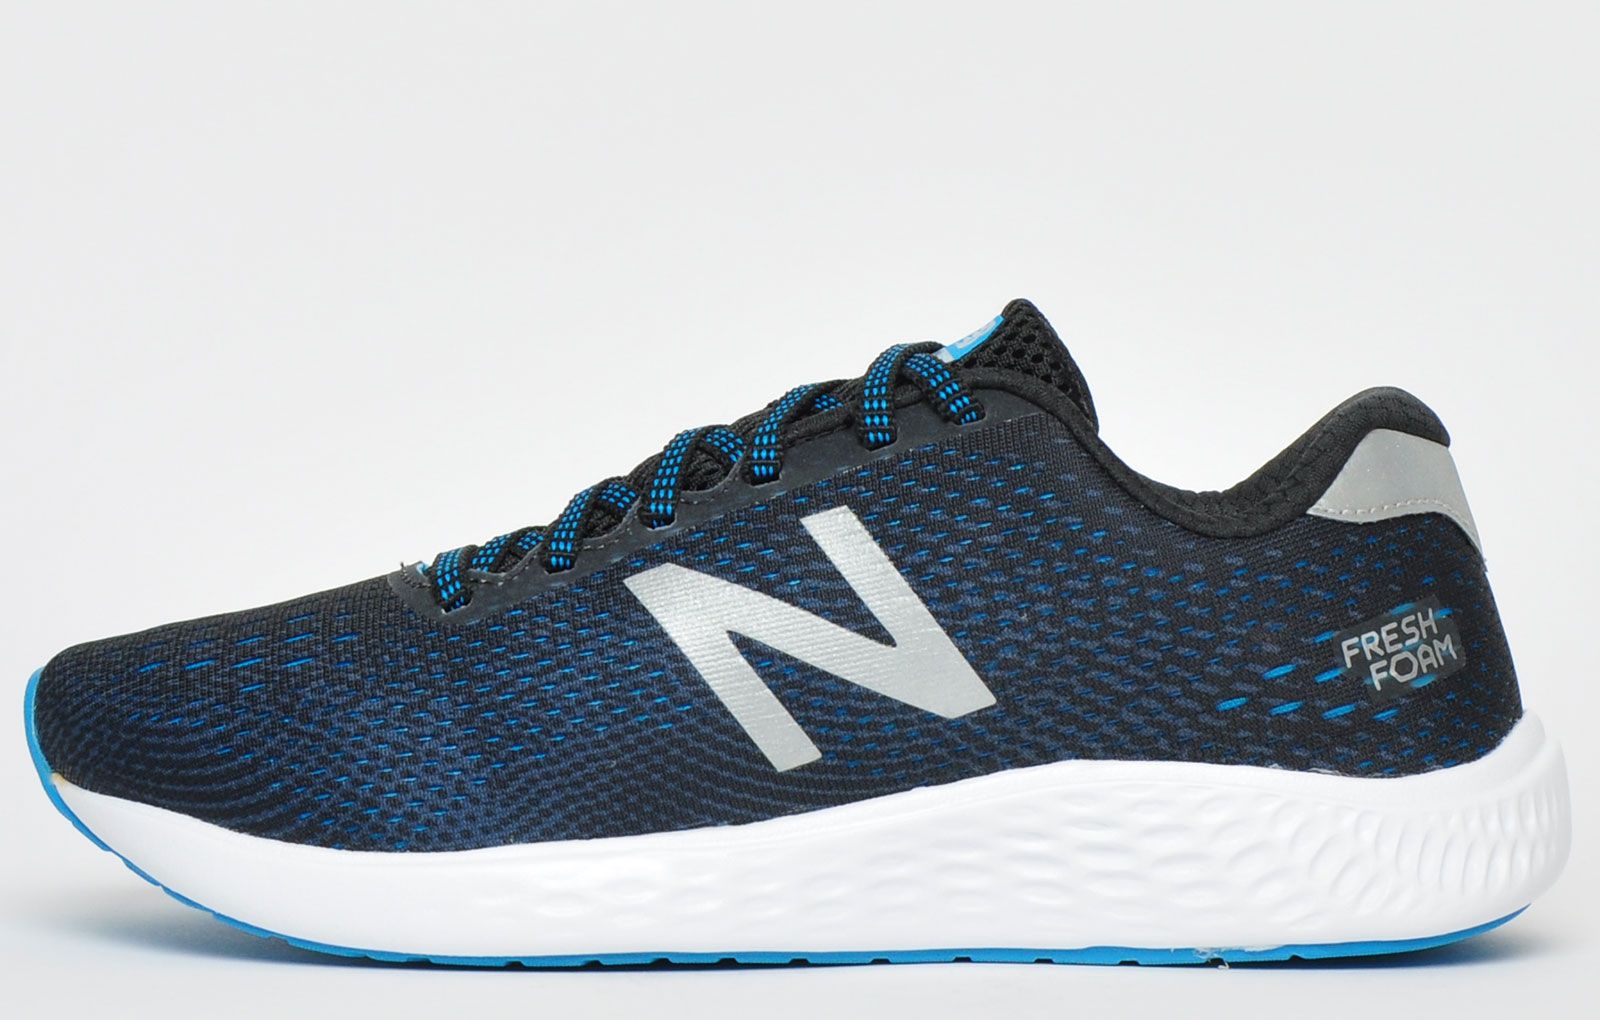 These women’s New Balance Fresh Foam Arishi running shoes feature a superior responsive midsole with fresh foam cushioning to provide outstanding comfort built to deliver versatile style and performance on the road and in the gym. <p class=